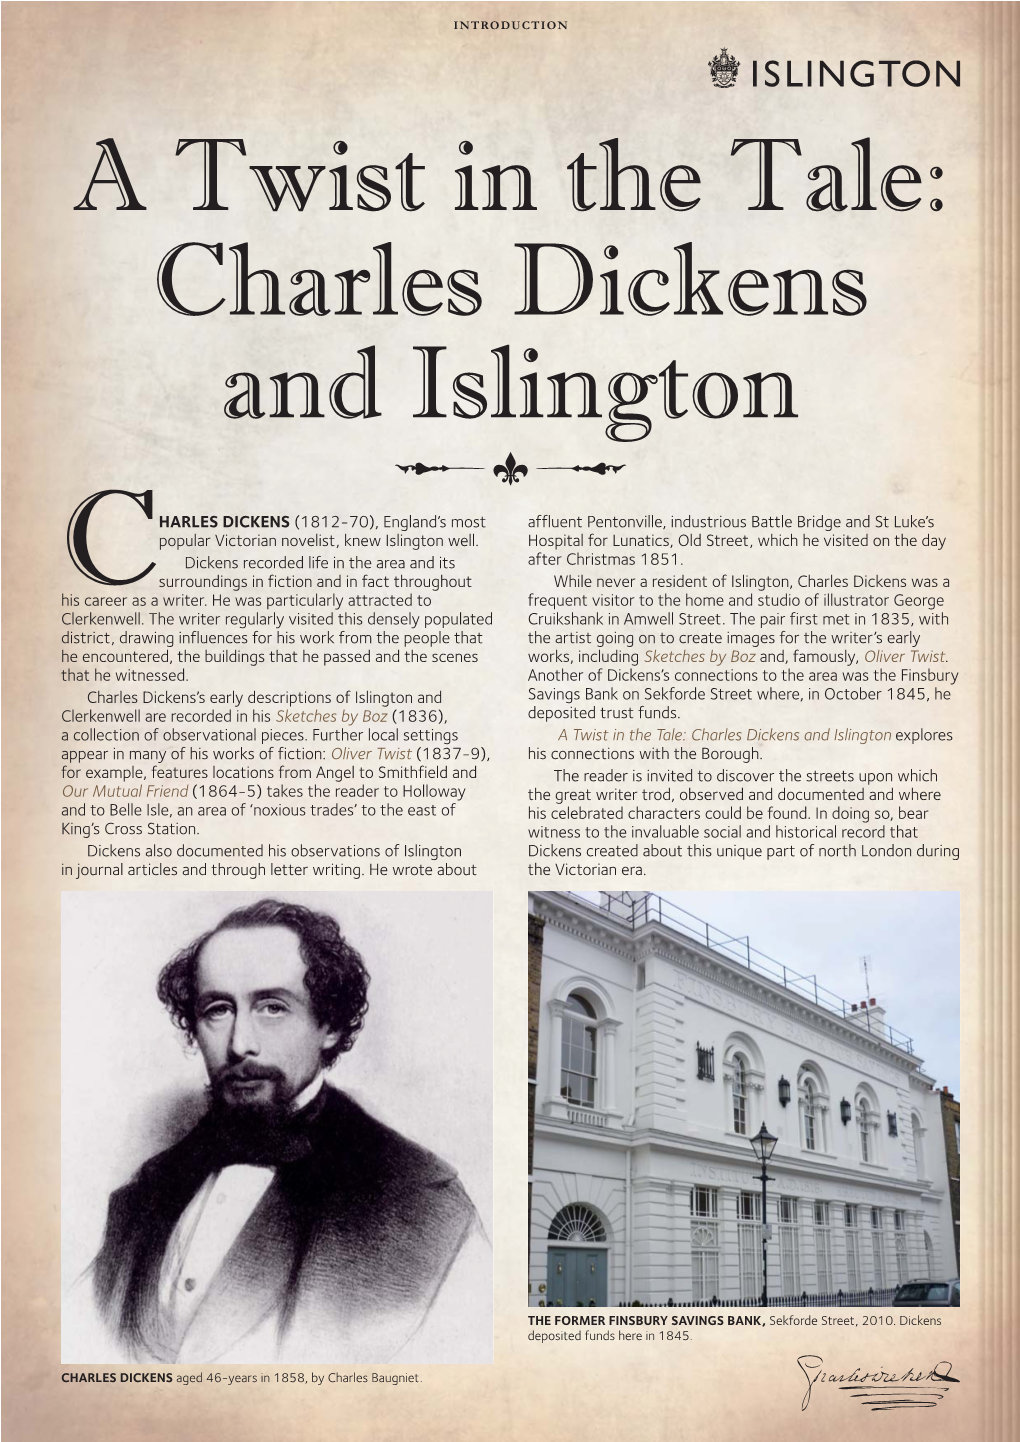 A Twist in the Tale: Charles Dickens and Islington